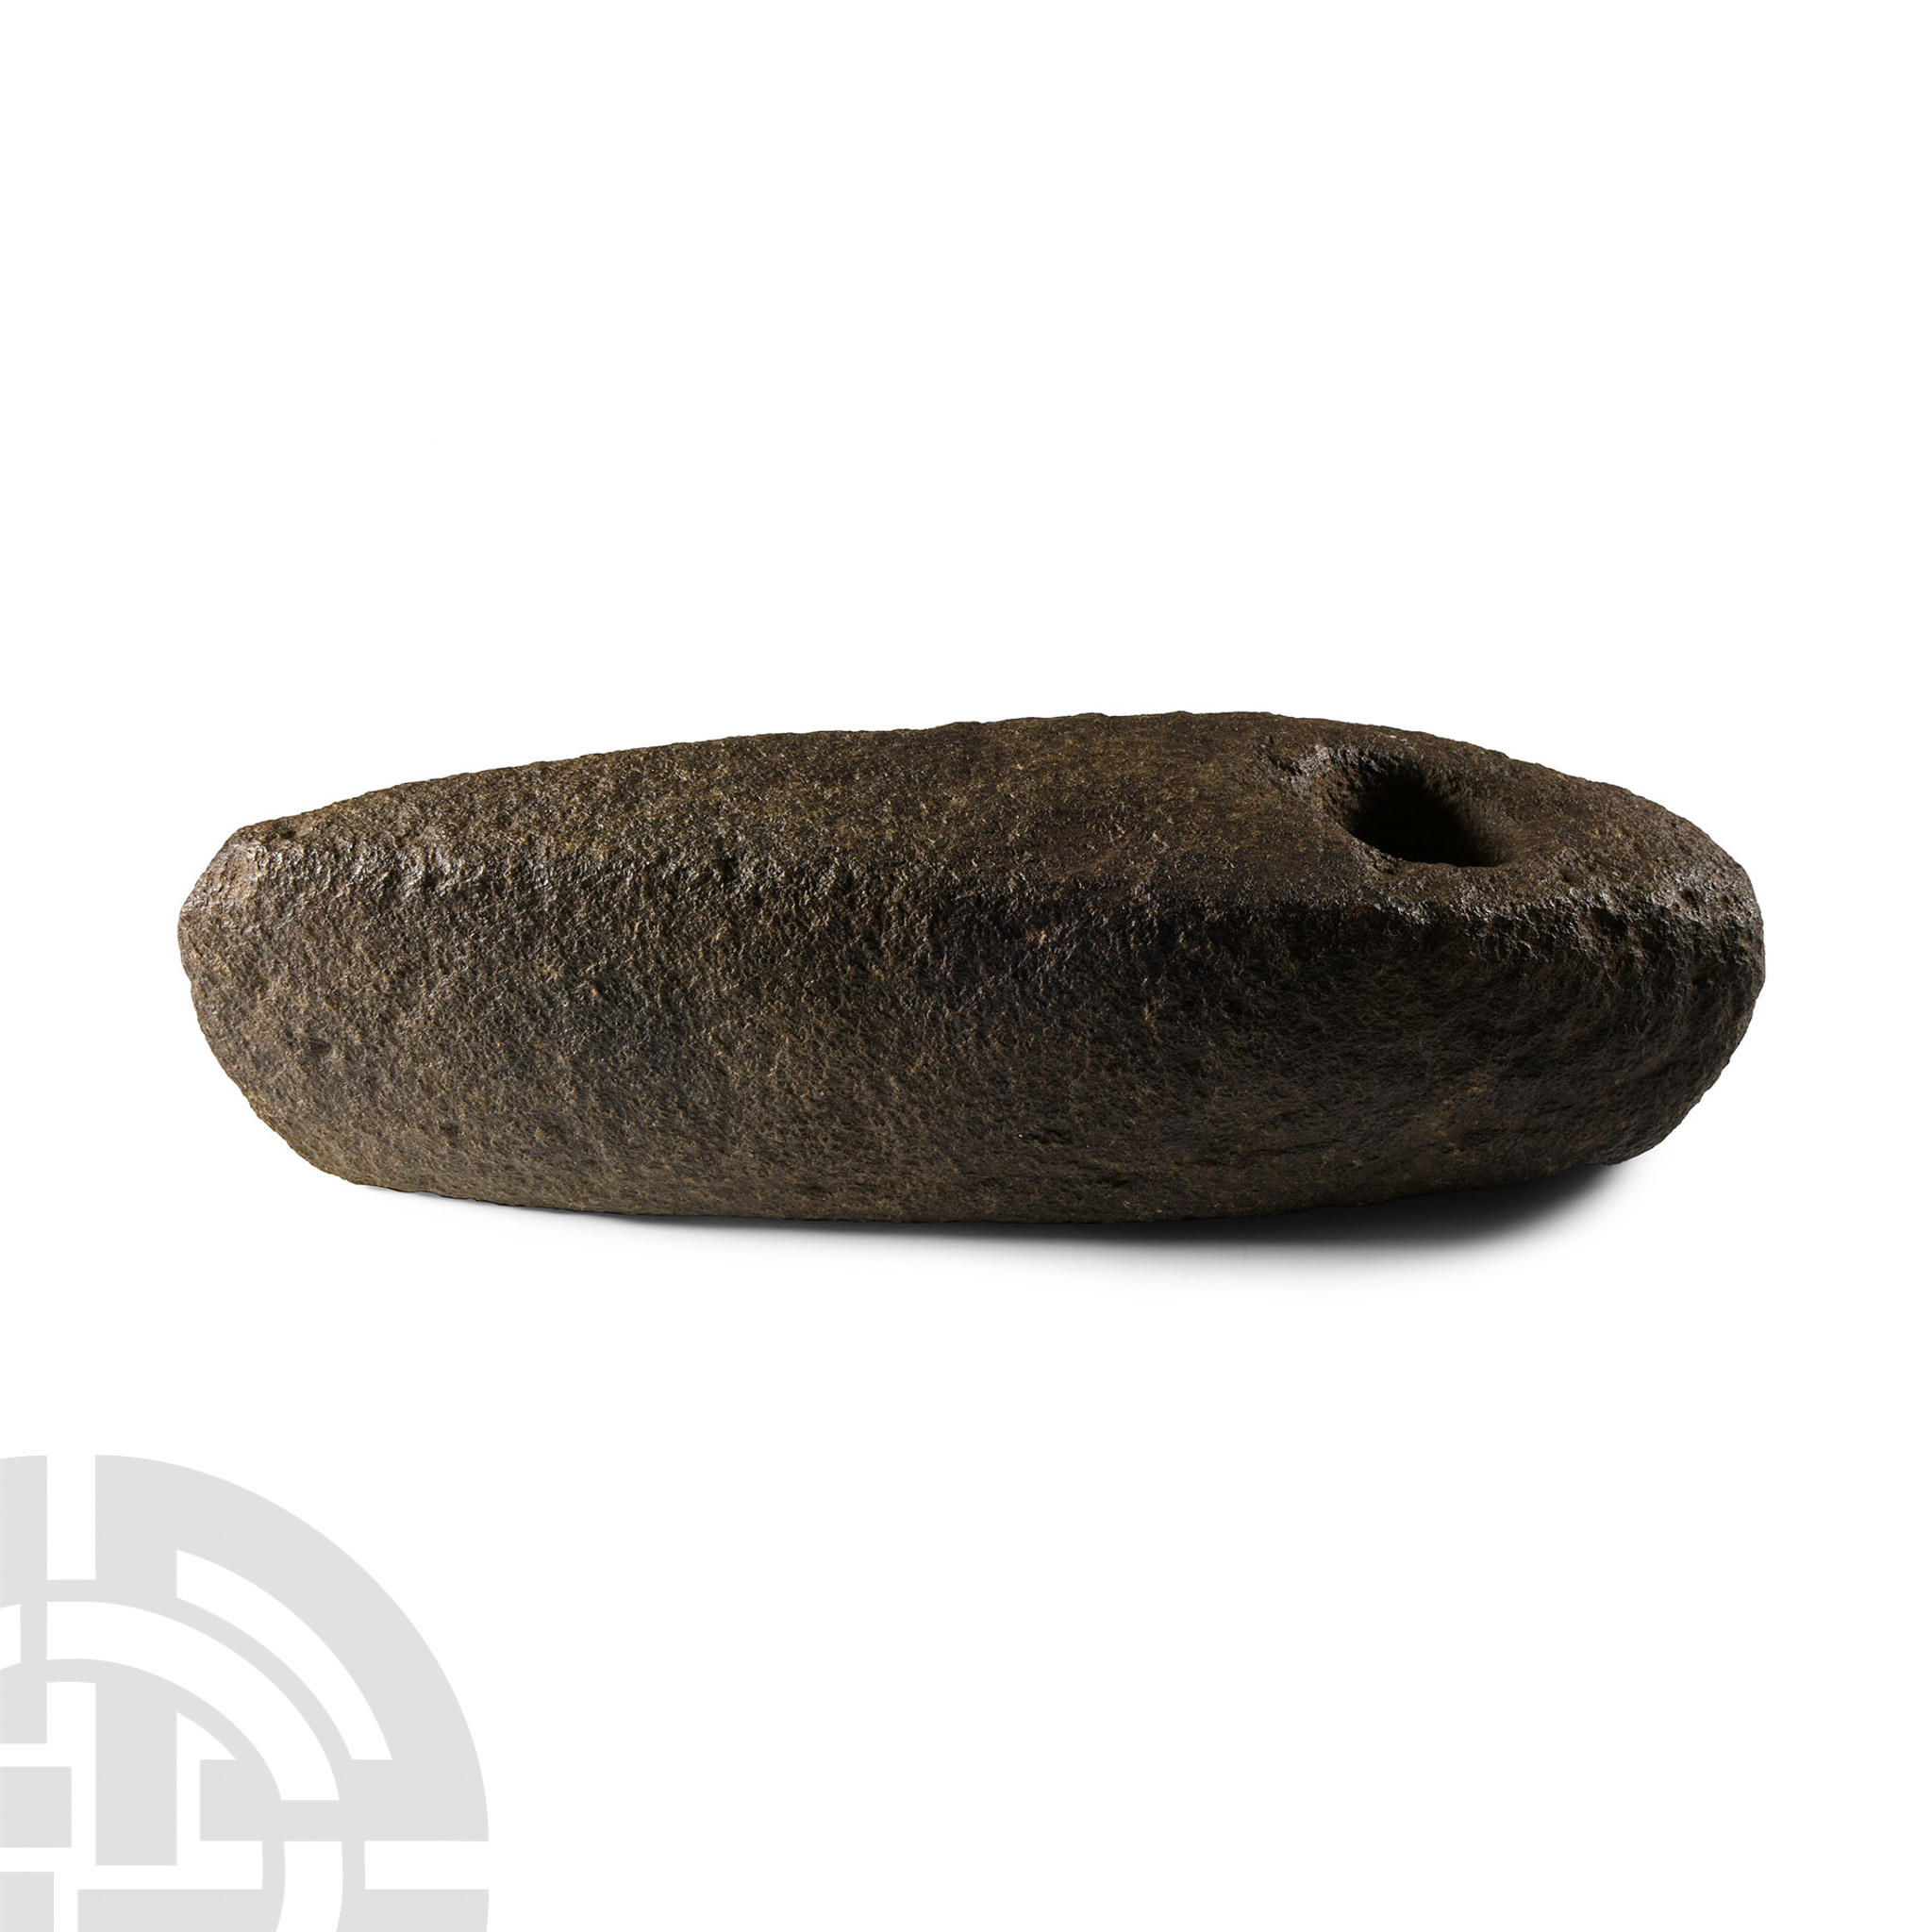 Large Stone Age Pierced Boat-Shaped Axehead - Image 3 of 3